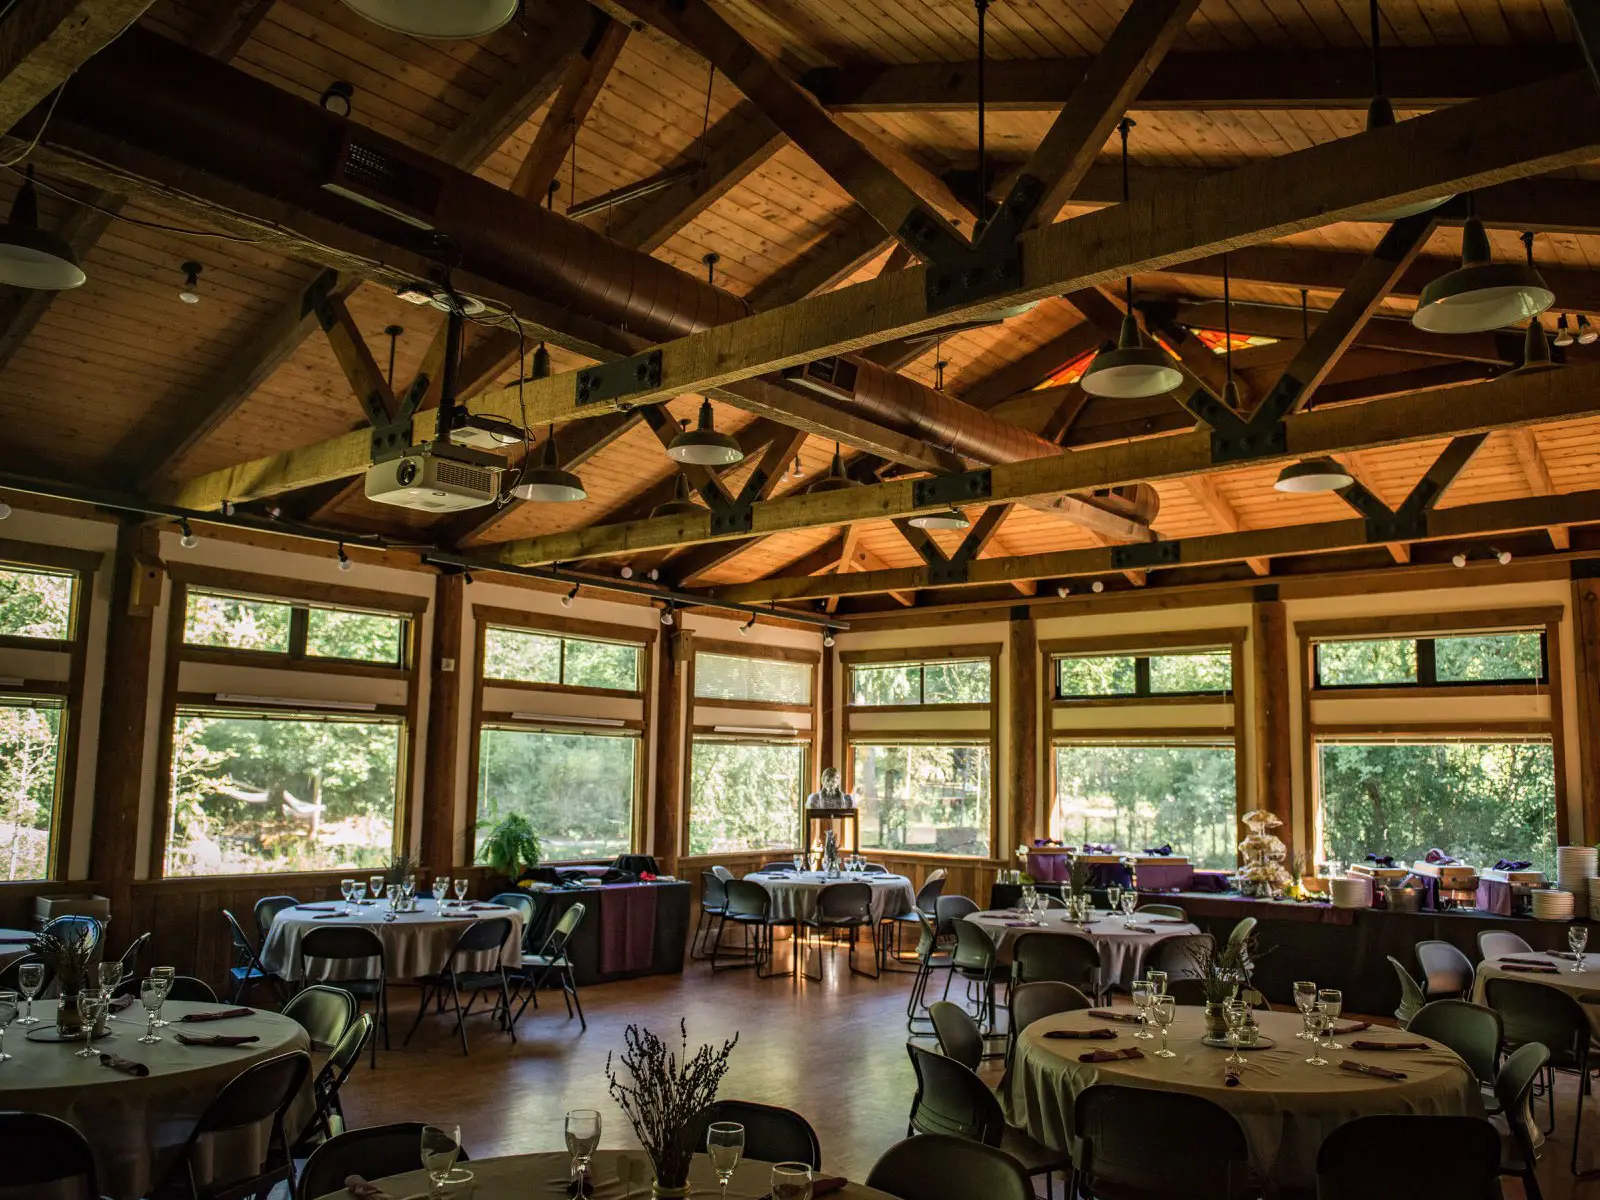 The inside of the Environmental Learning Center's Lakeside Hall, featuring decorated tables, glassware and catered drinks